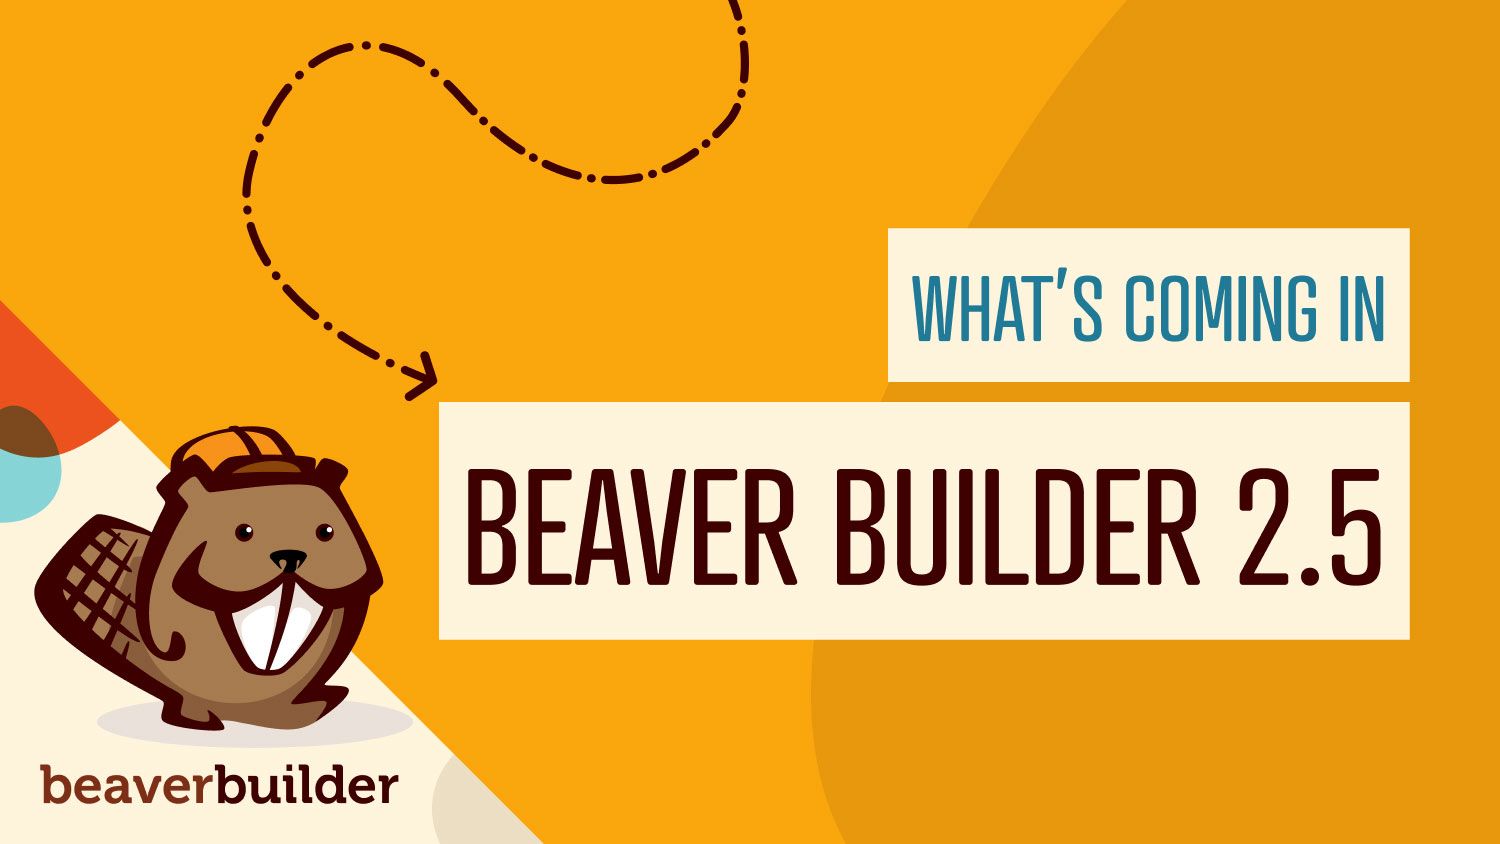 What's new in Beaver Builder 2.5